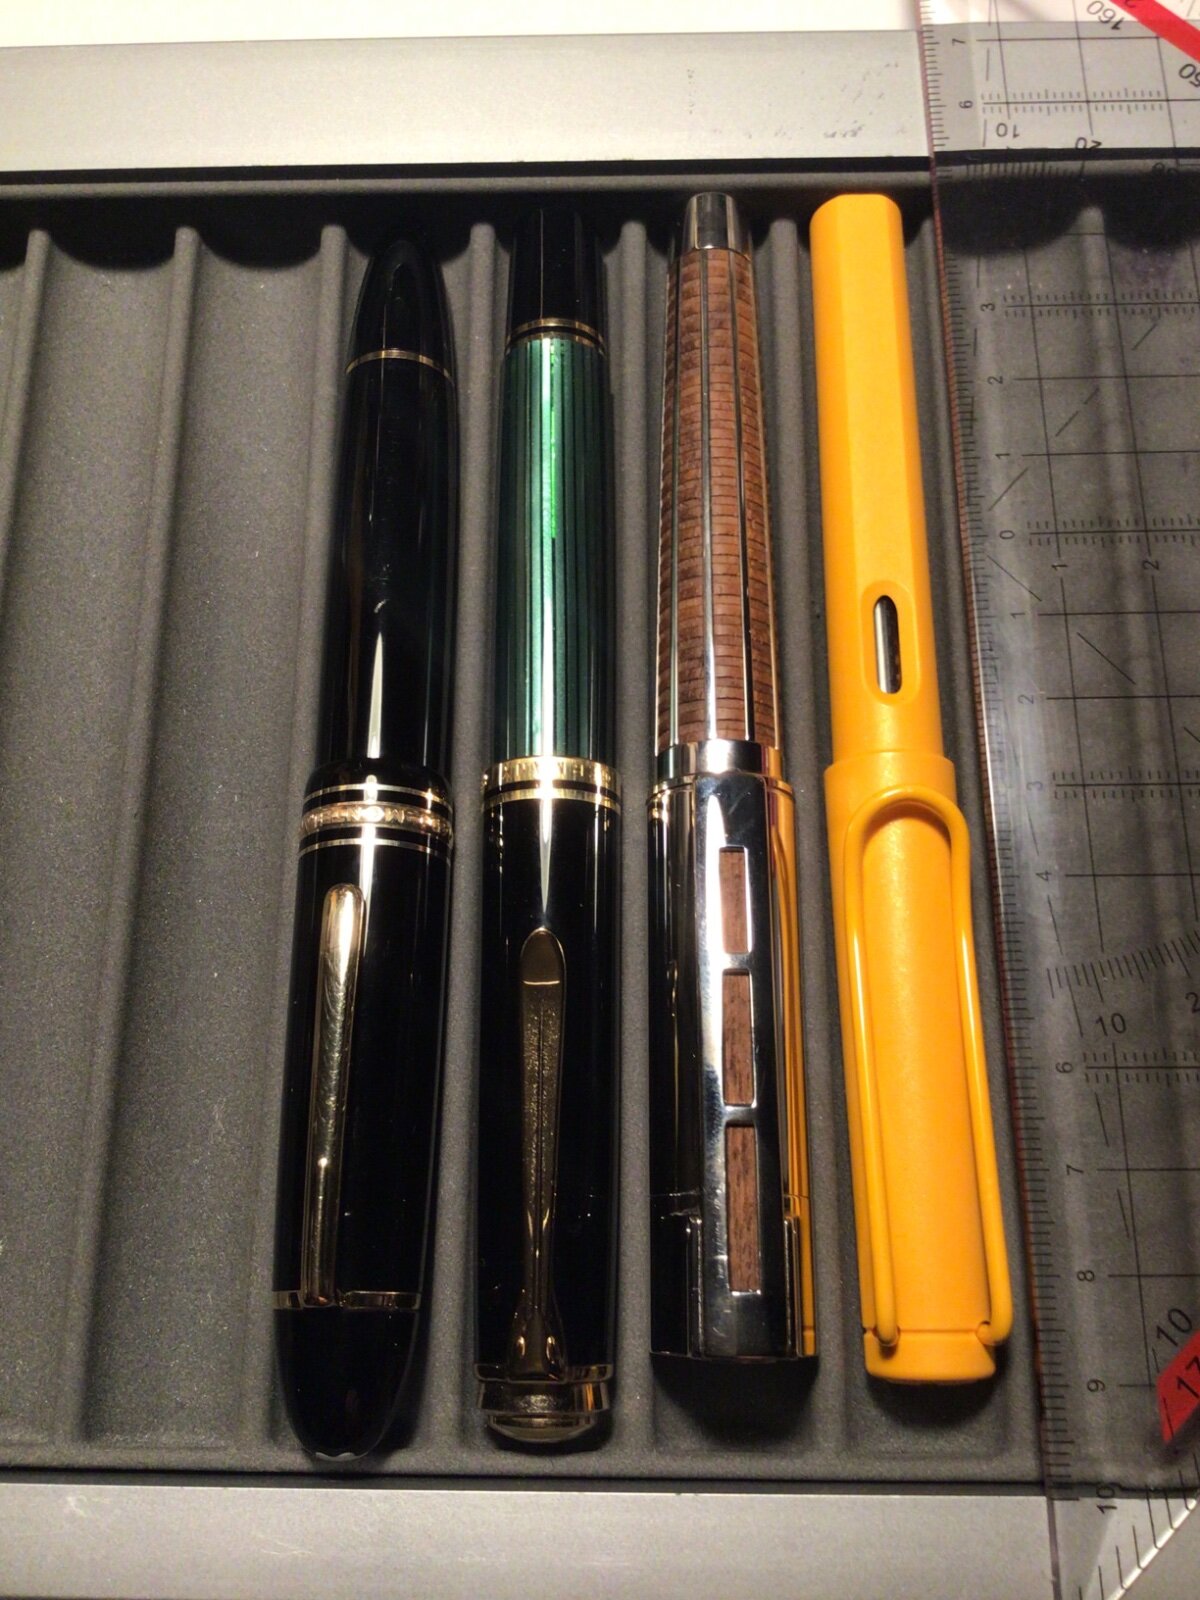 Rollerball Pens – Truphae